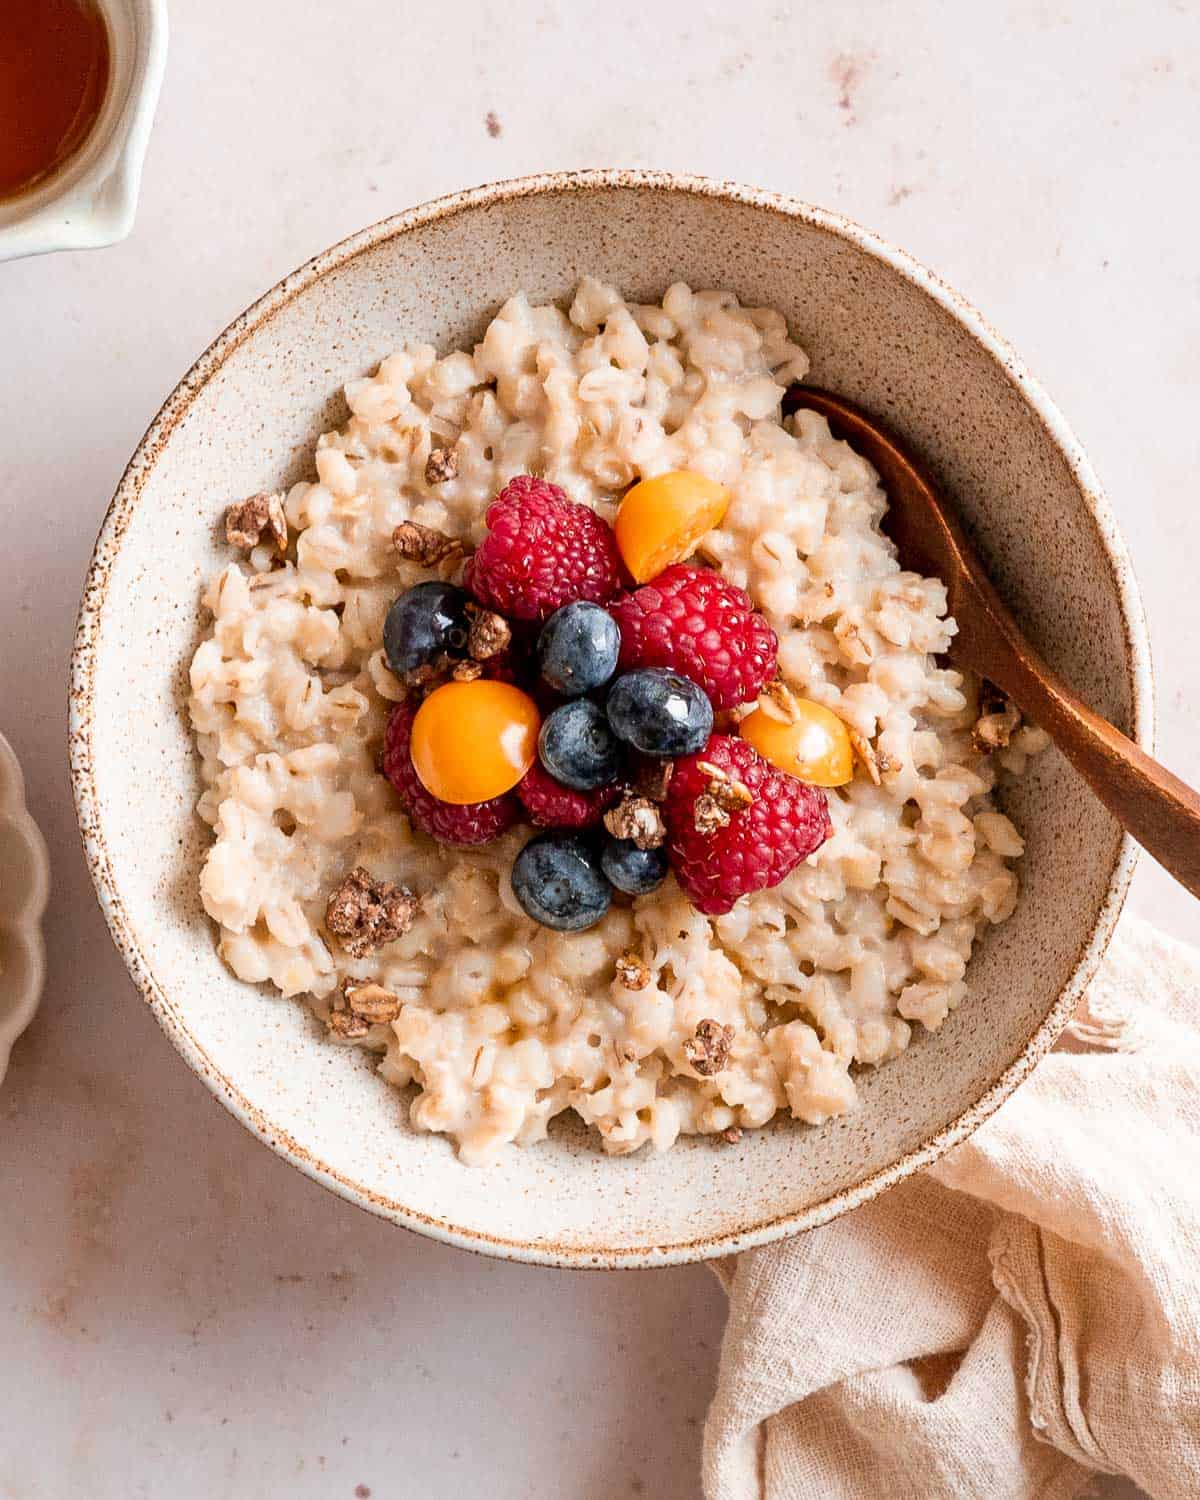 barley porridge made with pearl barley that has not been blended. topped with fresh fruit.